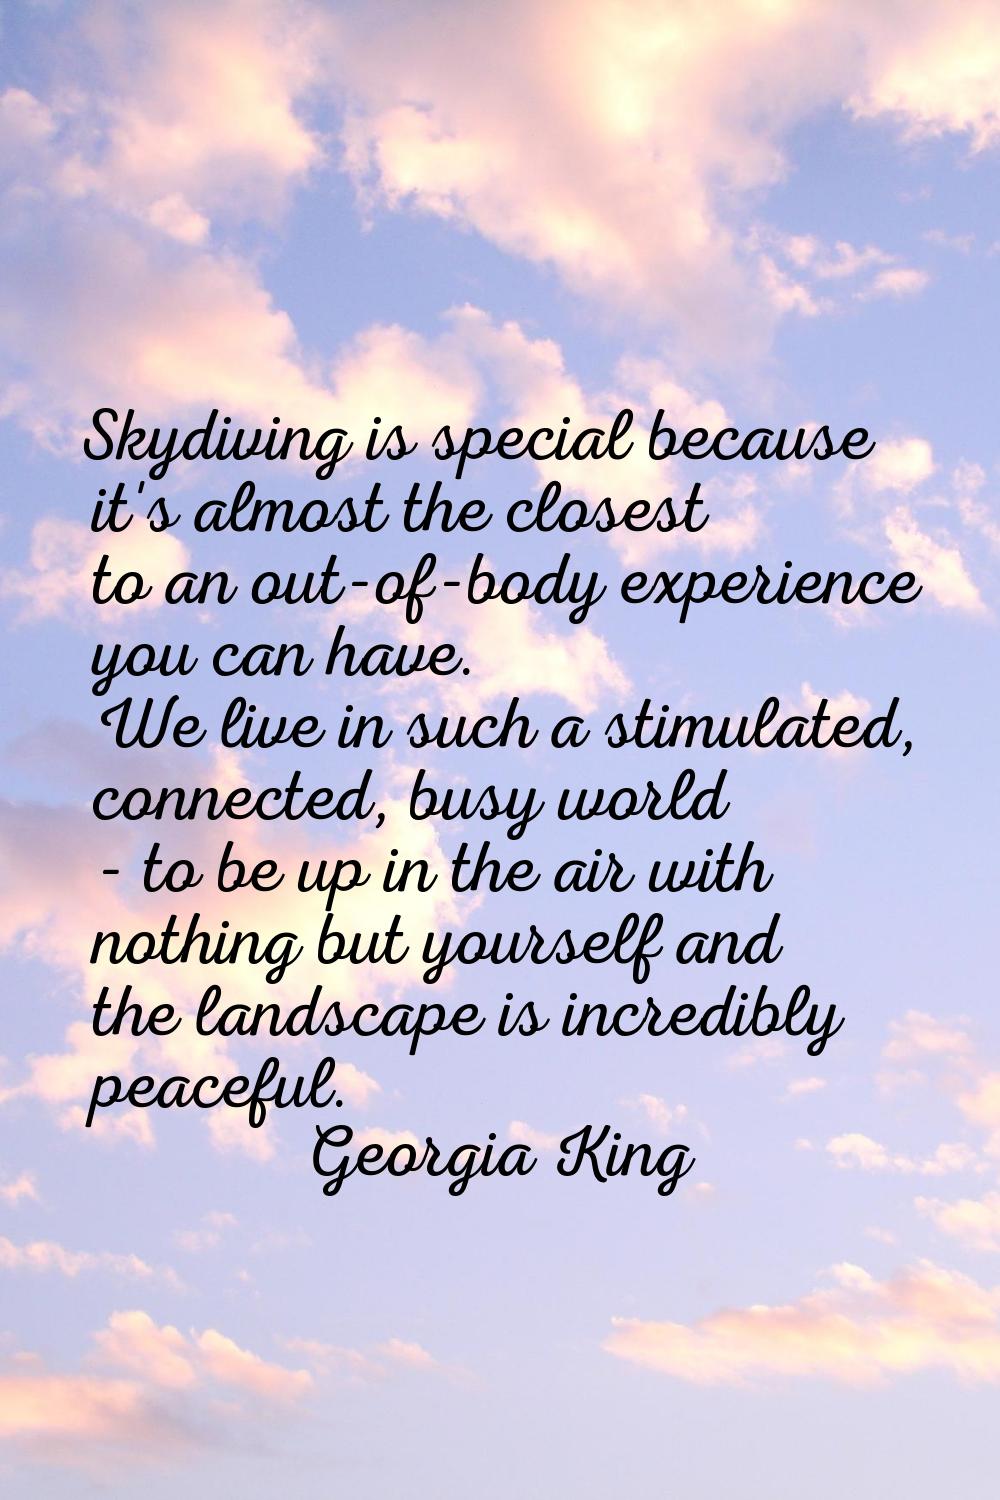 Skydiving is special because it's almost the closest to an out-of-body experience you can have. We 